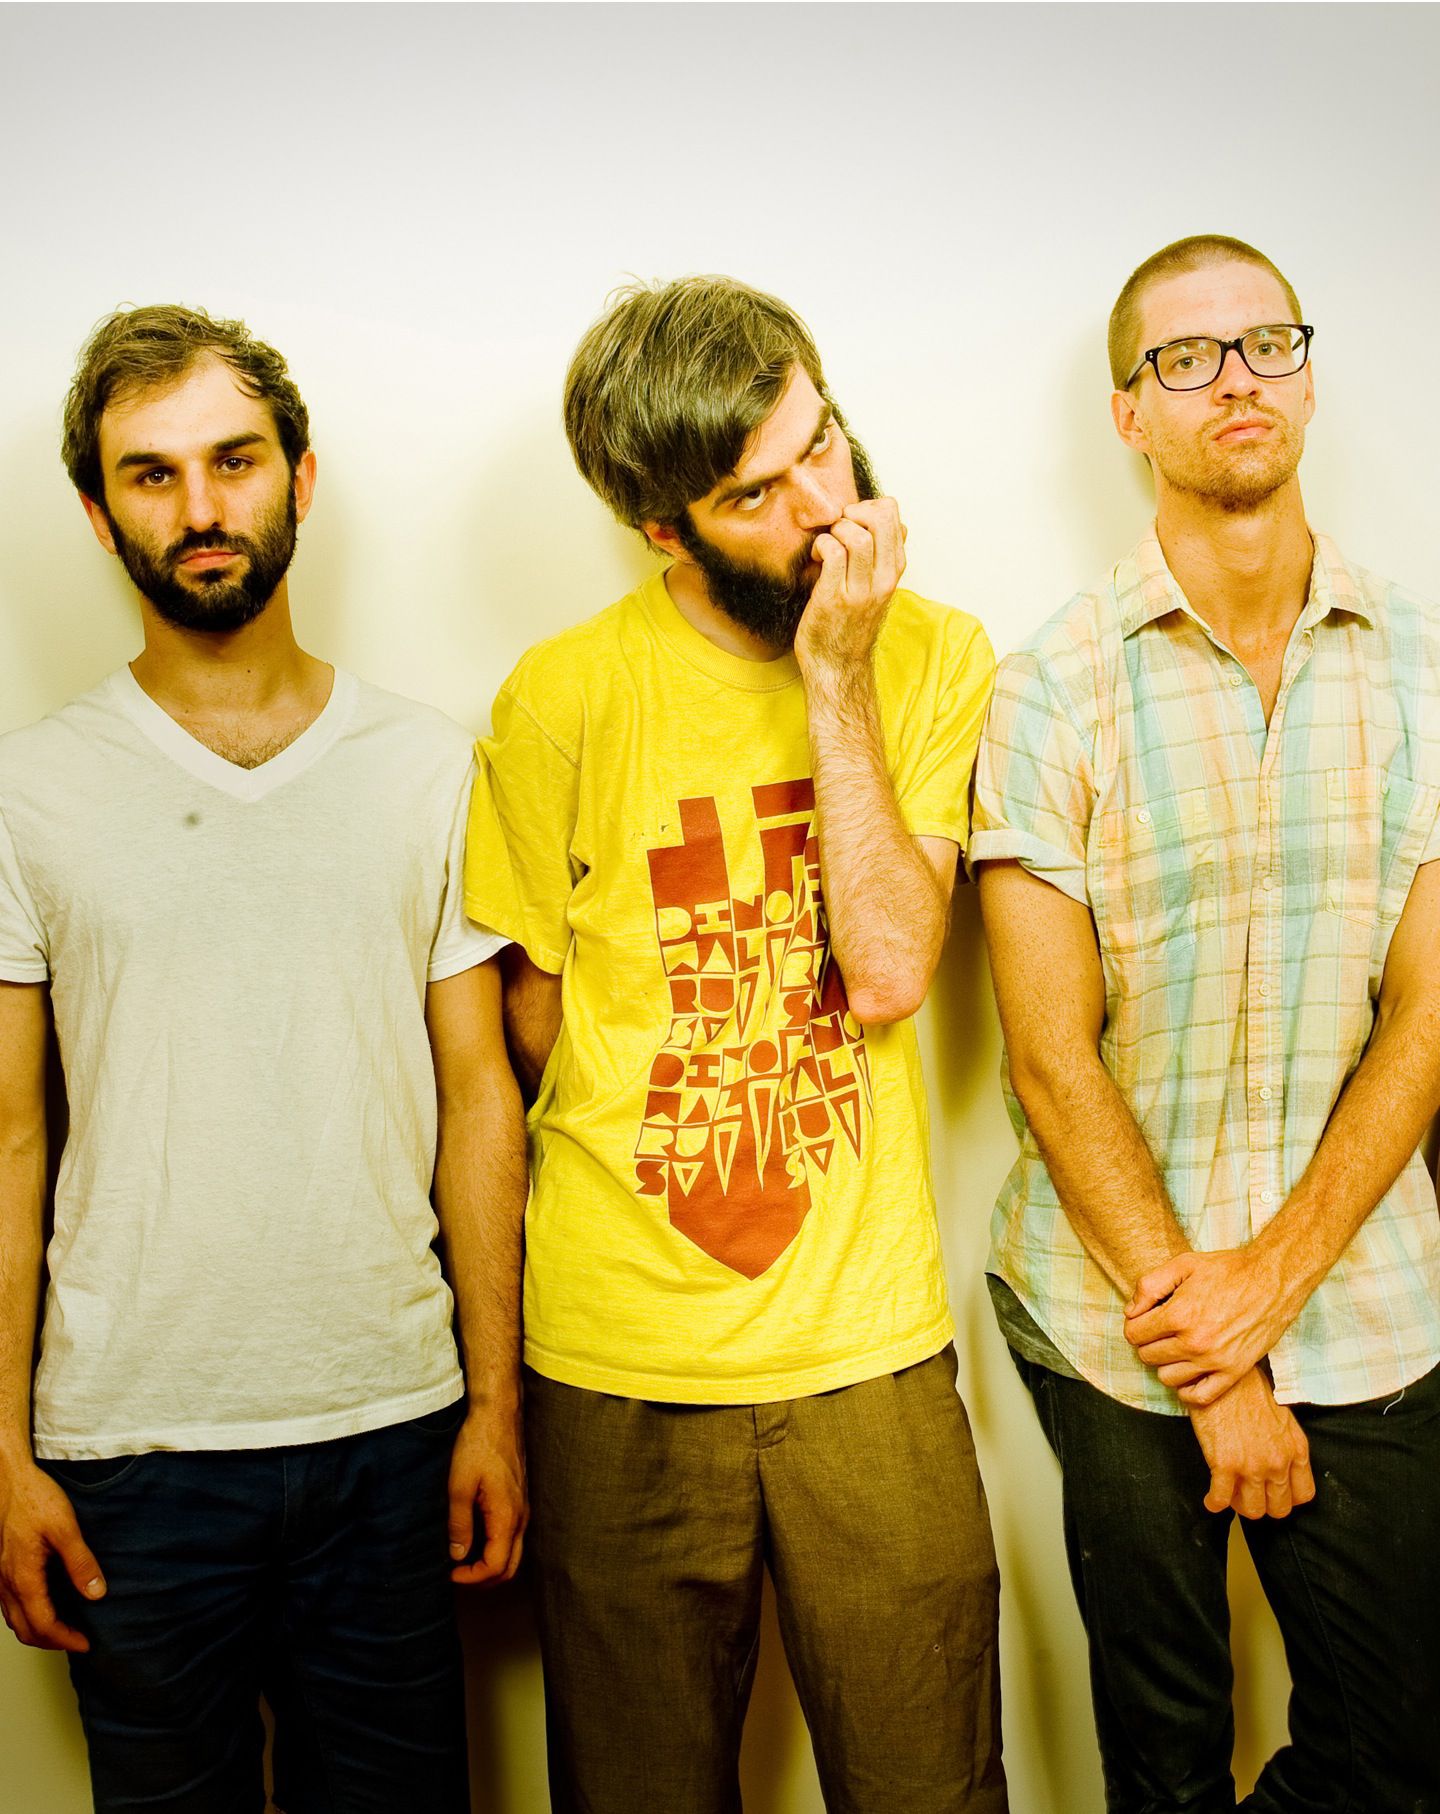 Photo Courtesy of victoria jacobsPatrick Stickles, center, is the main singer and songwriter of TitusAndronicus.